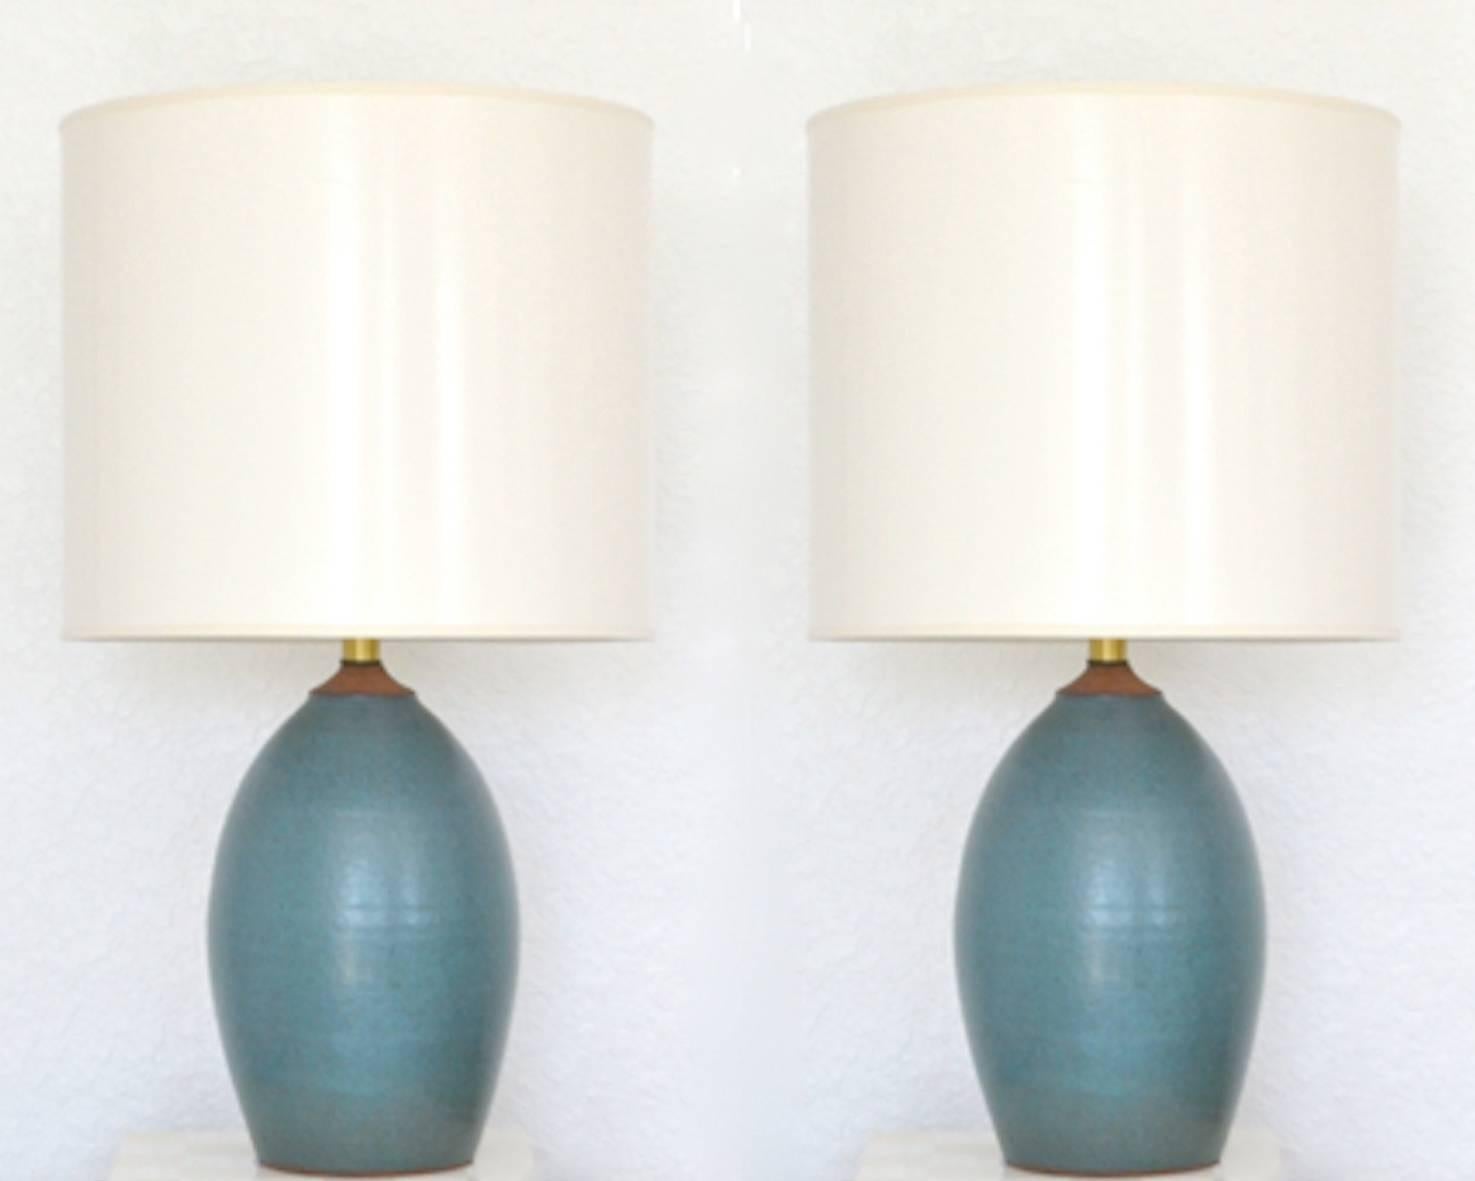 Brass Pair of Mid-Century Matte Blue Glazed Ceramic Organic Form Table Lamps